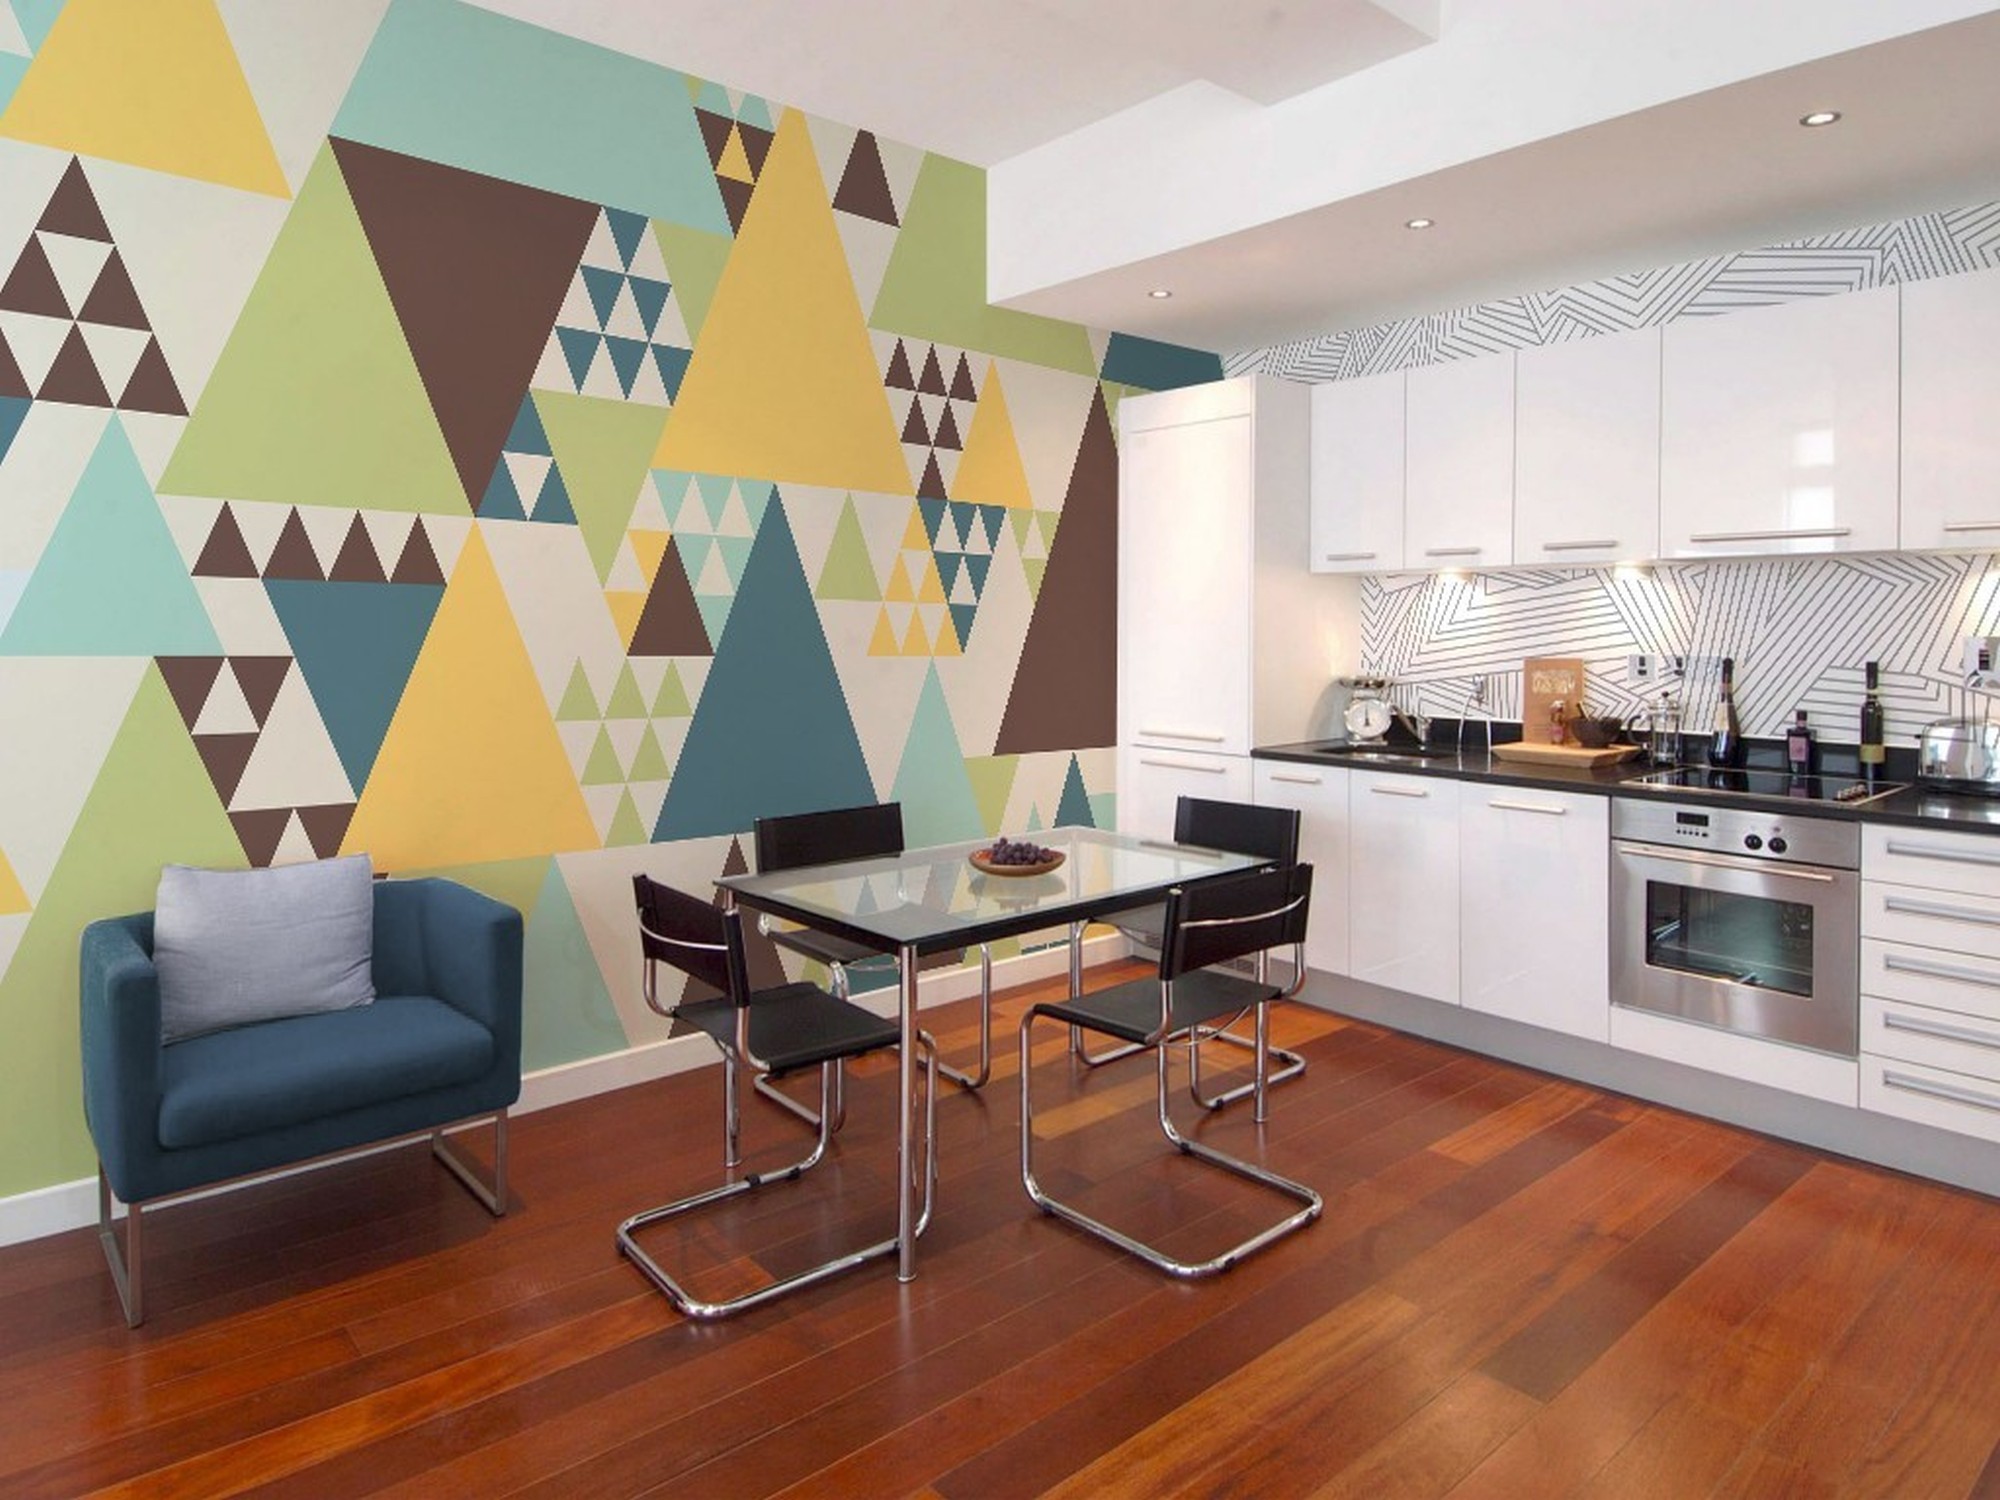 Triangle Walk • Kitchen - Contemporary - Textures and patterns - Wall Murals - Stickers